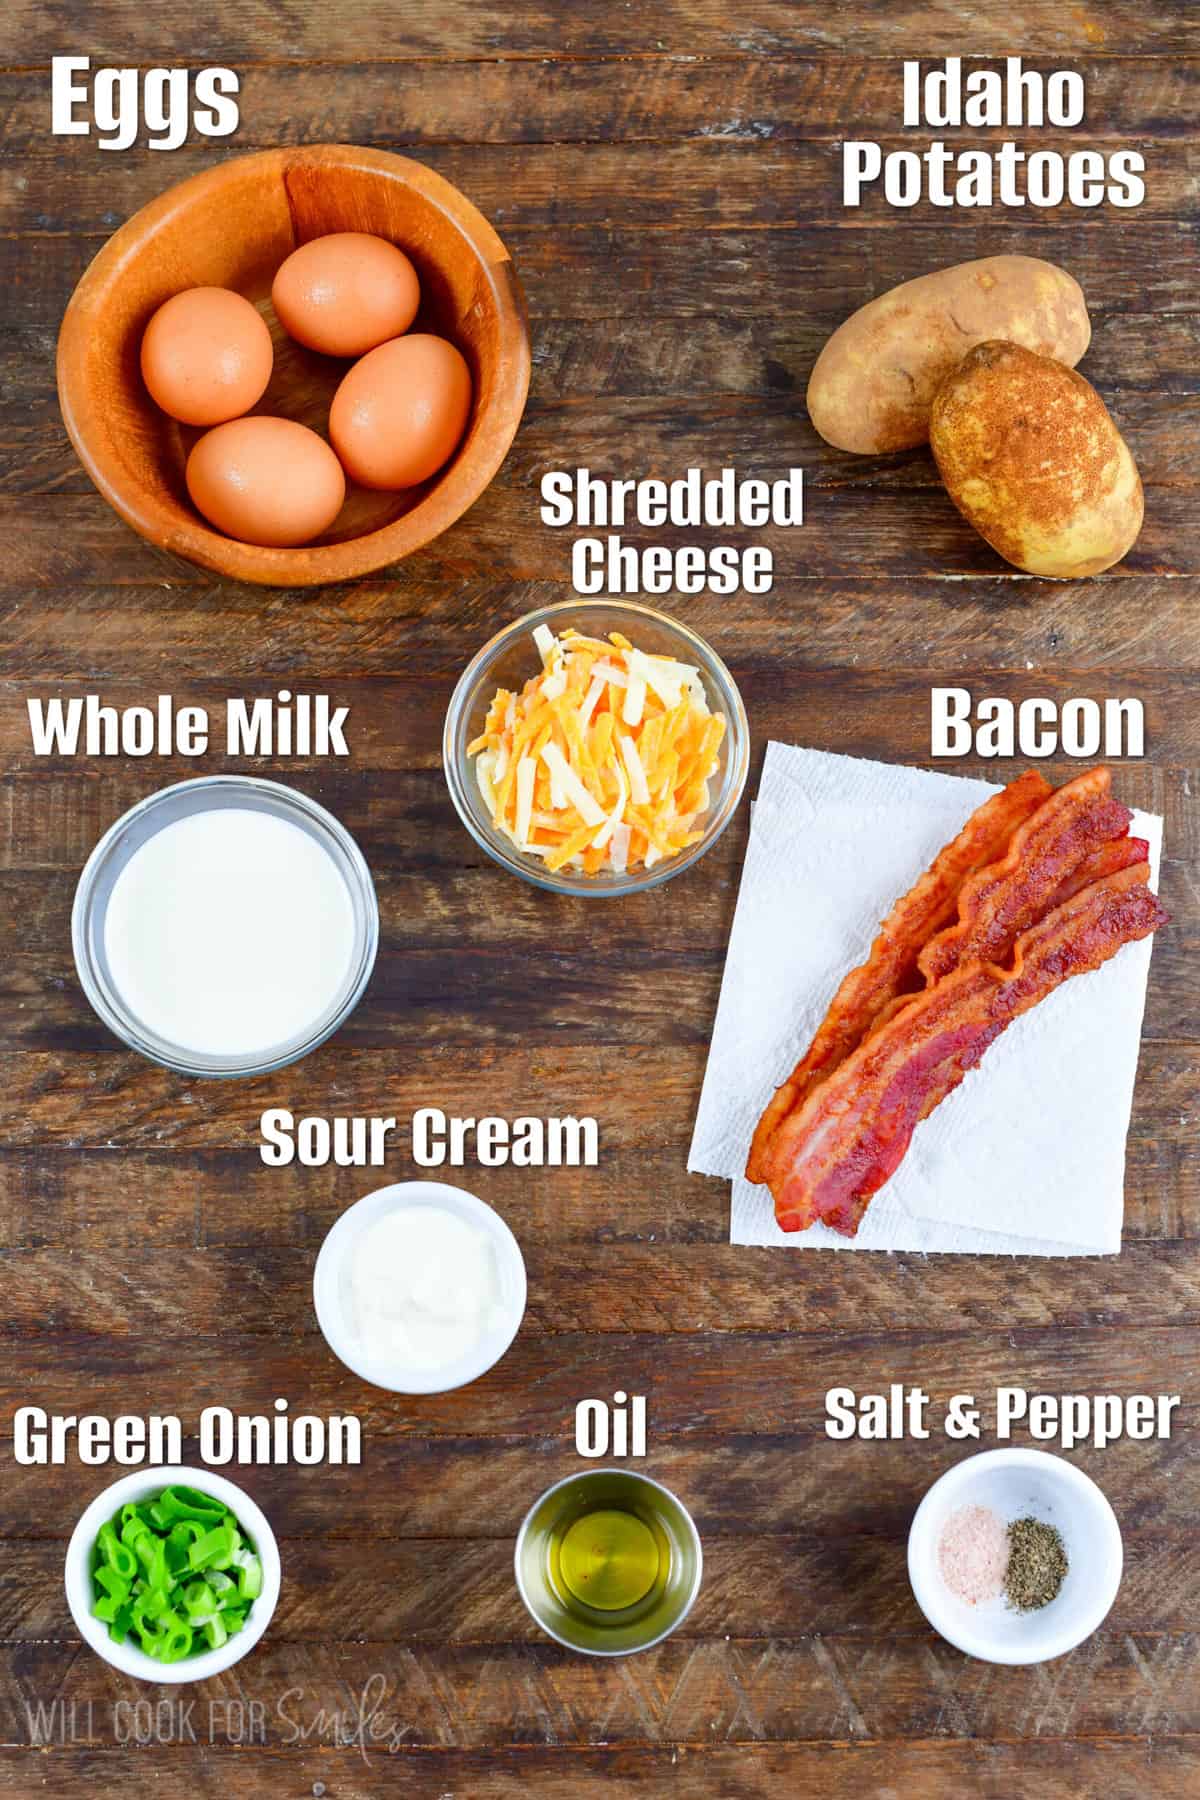 ingredients to make loaded potato breakfast skillet on a wooden background.